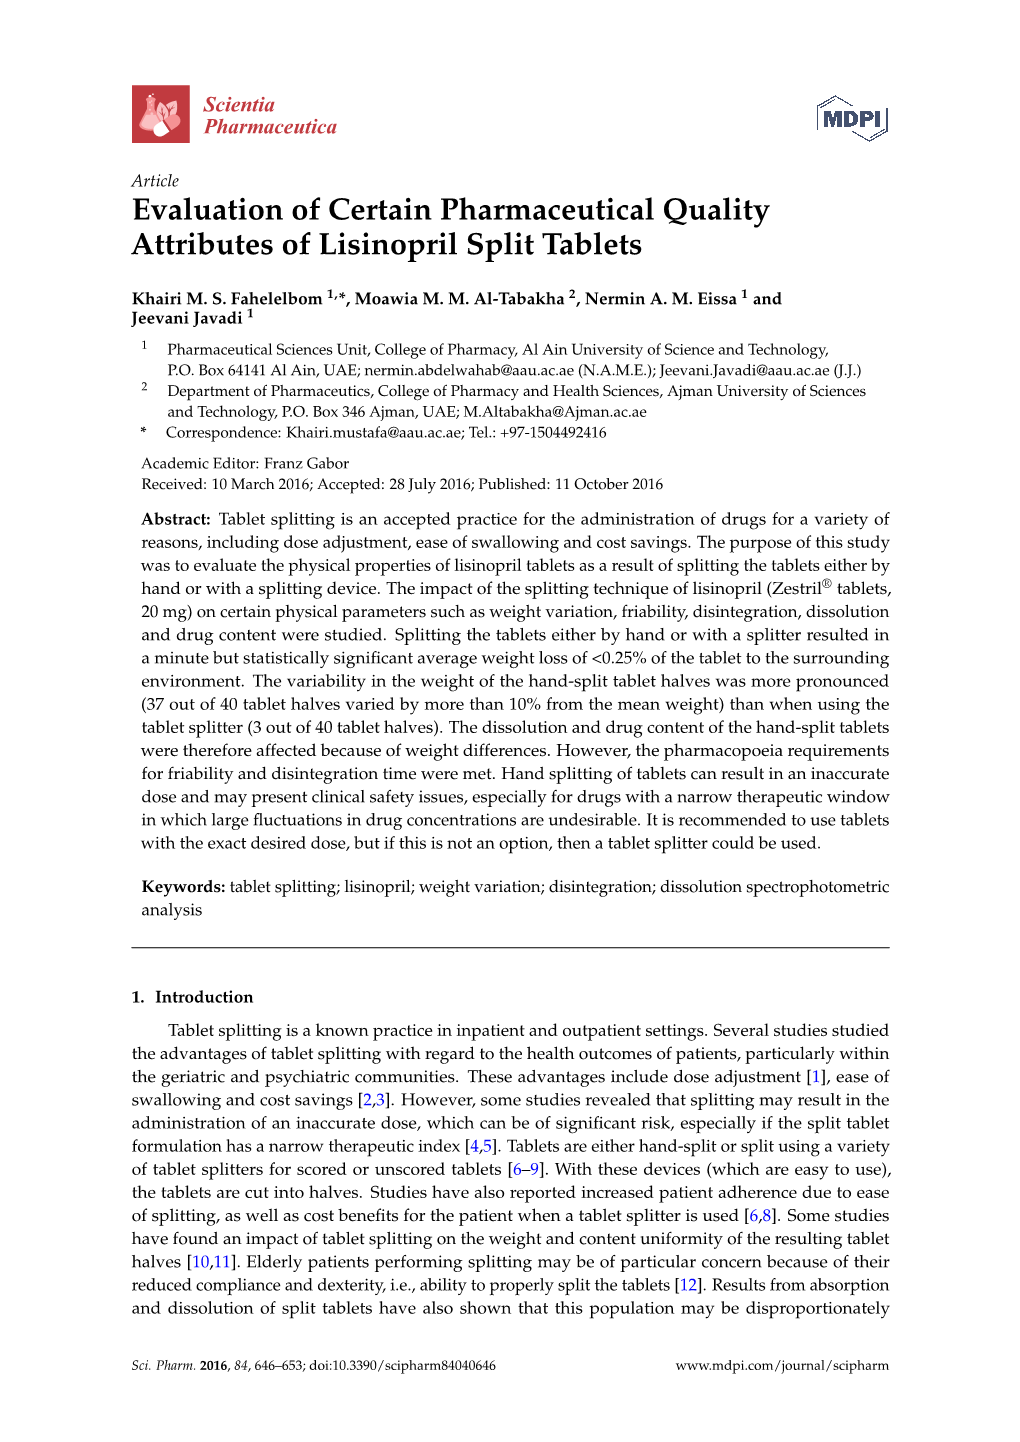 Evaluation of Certain Pharmaceutical Quality Attributes of Lisinopril Split Tablets